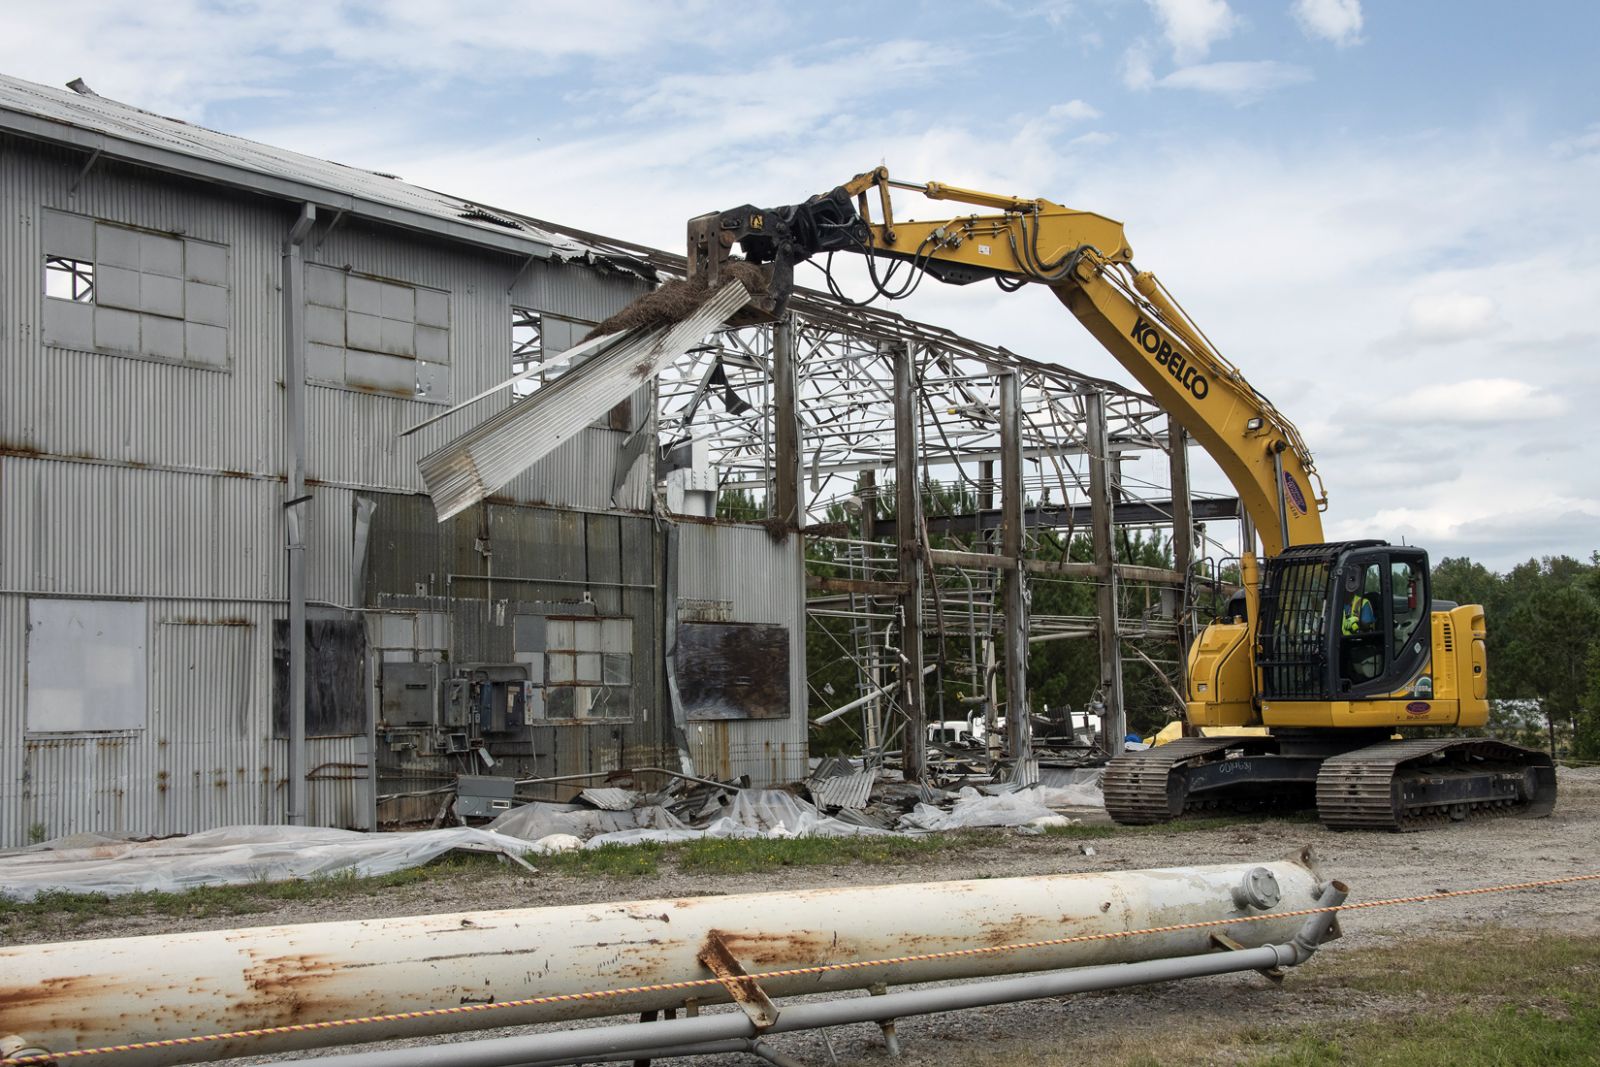 At the height of the Cold War, the Ford Building was used to test components used in five nuclear reactors at the Savannah River Site. An excavator is shown here removing a section of the facility's metal roof. (Photo/Provided)